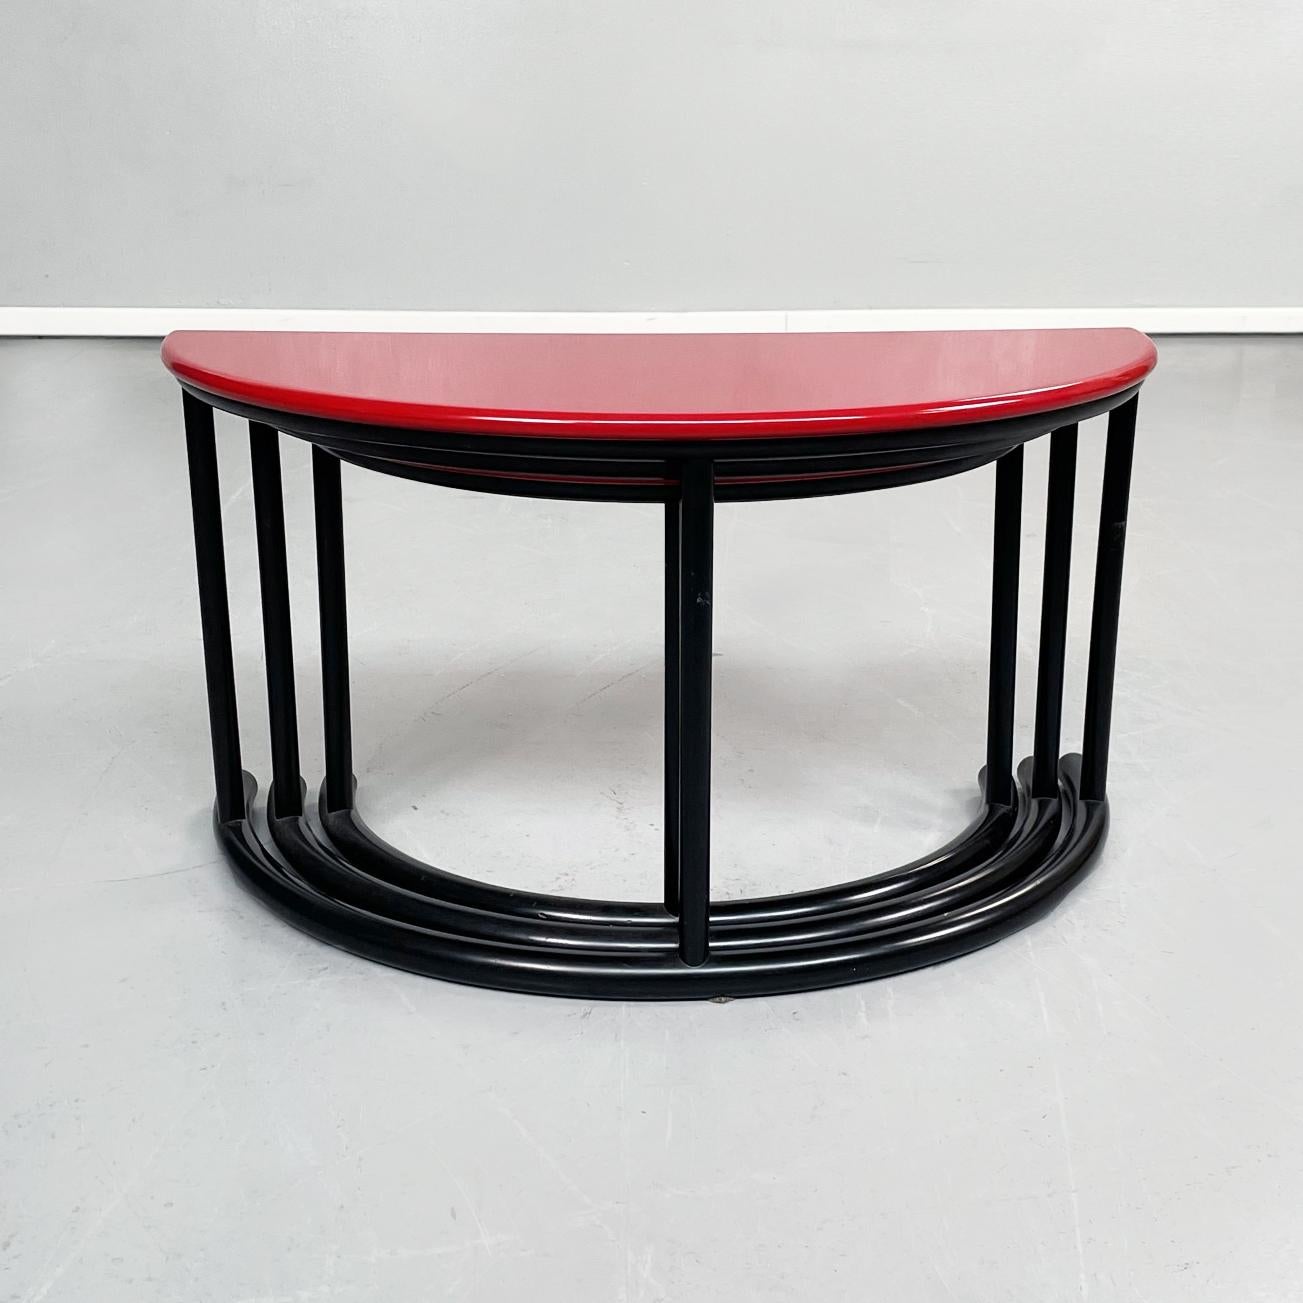 Late 20th Century Italian Mid-Century Trio of Coffee Tables Tria by Frattini Morphos Acerbis 1980s For Sale